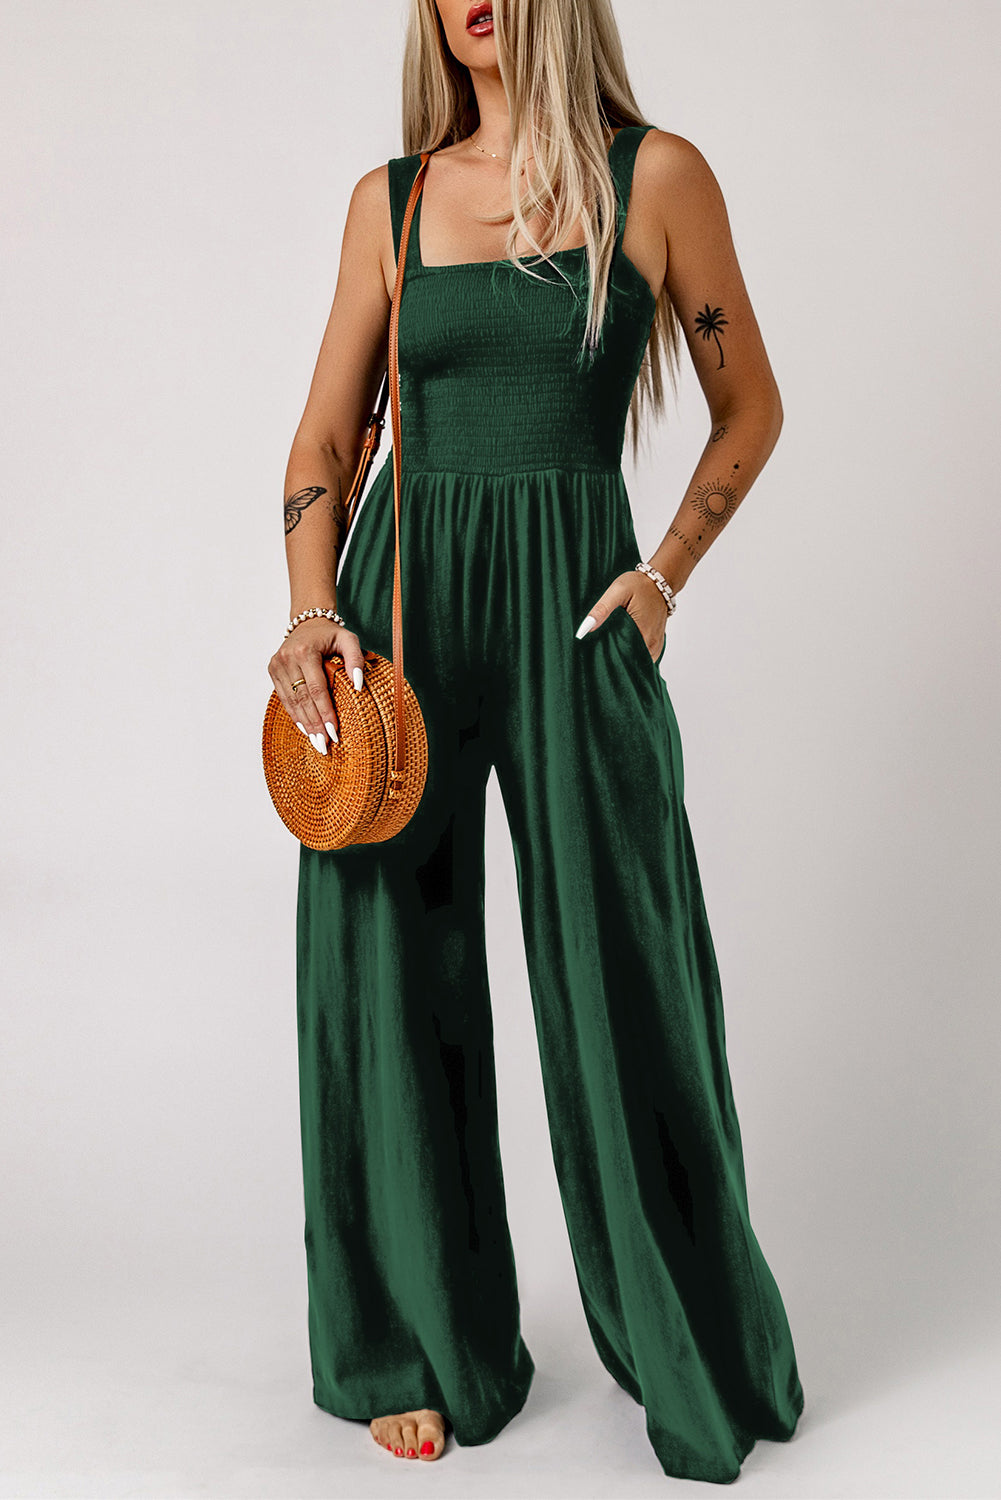 Green Smocked Sleeveless Wide Leg Jumpsuit with Pockets - Dixie Hike & Style